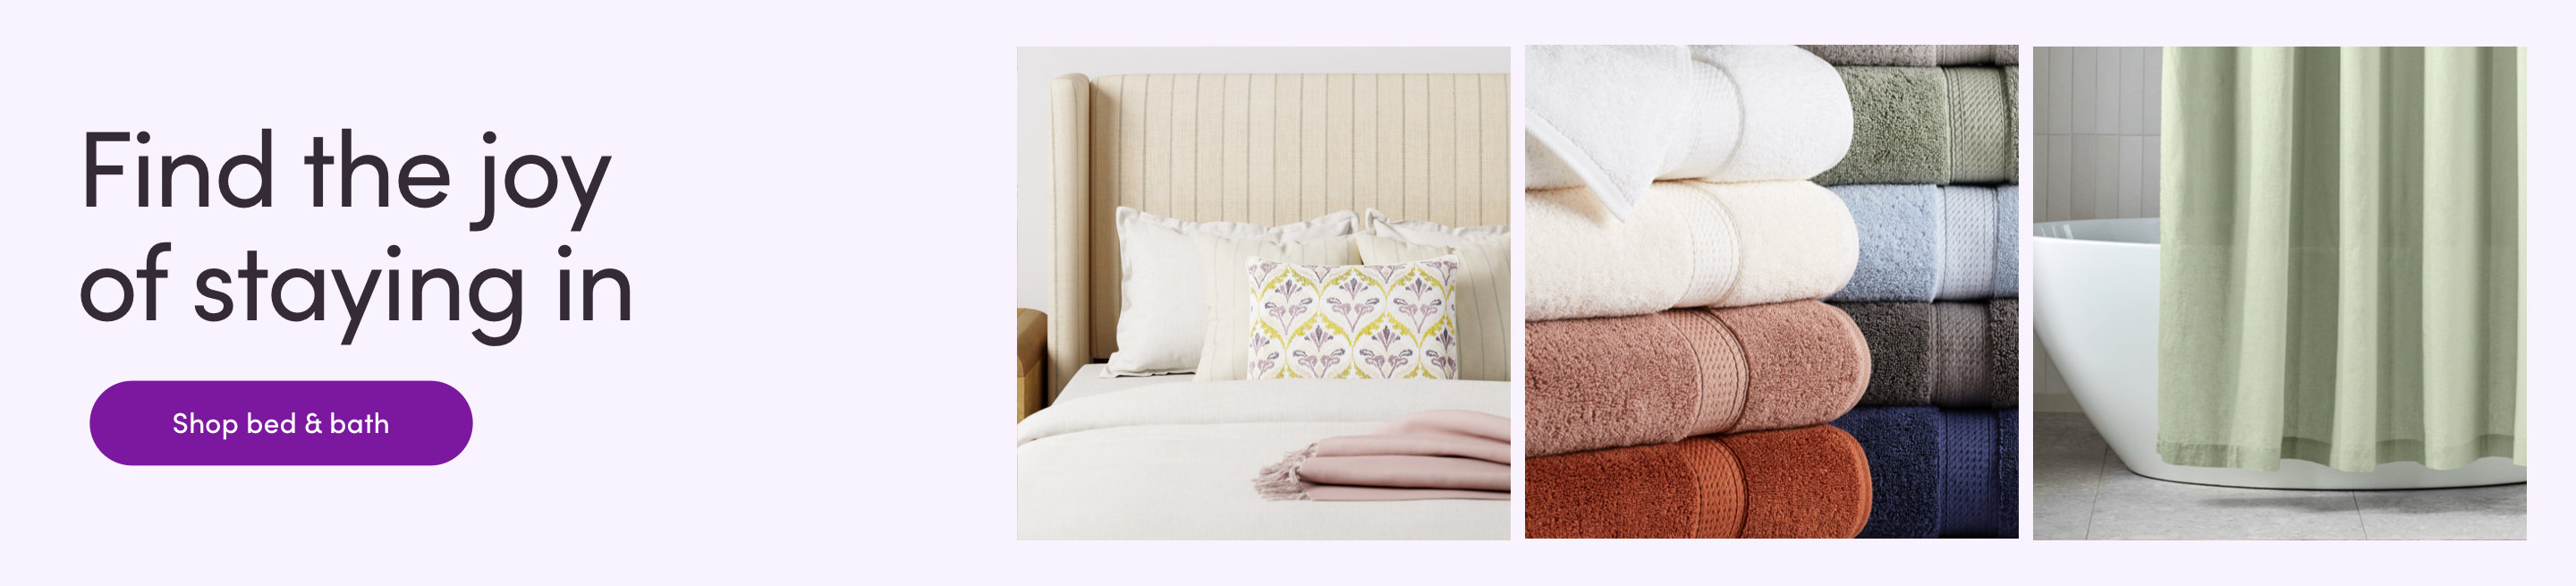 Find the joy of staying in. Shop bed & bath. 